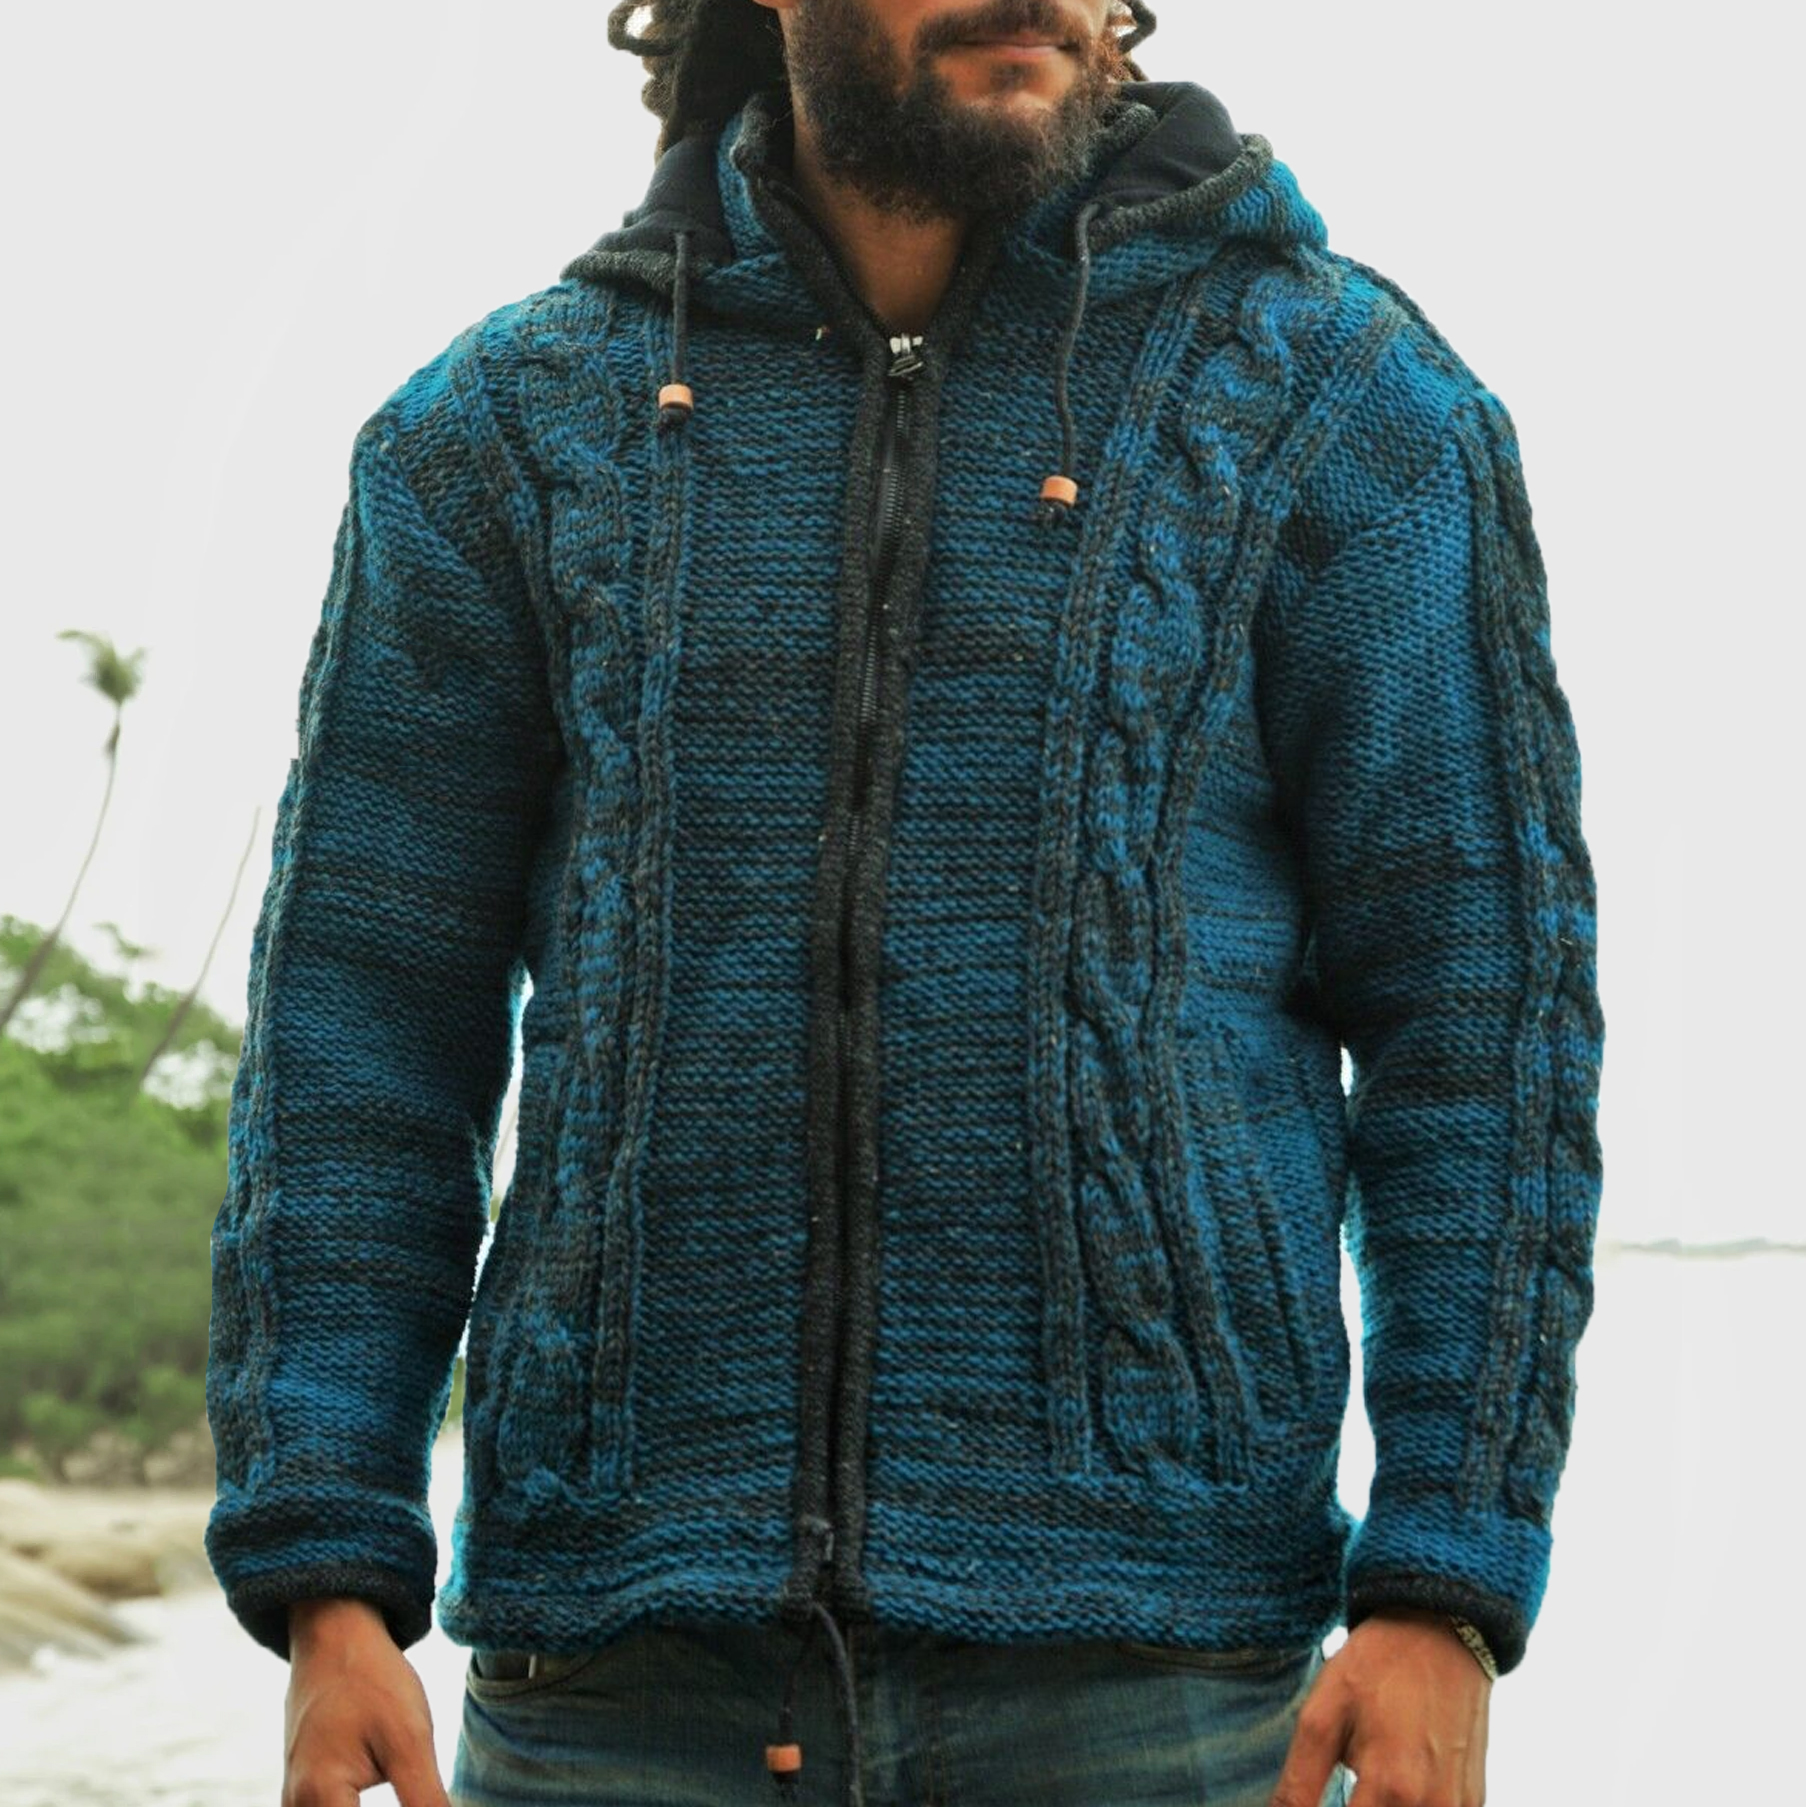 Men's Warm Hippie Teal Chic Grey Double Knitted Cardigan